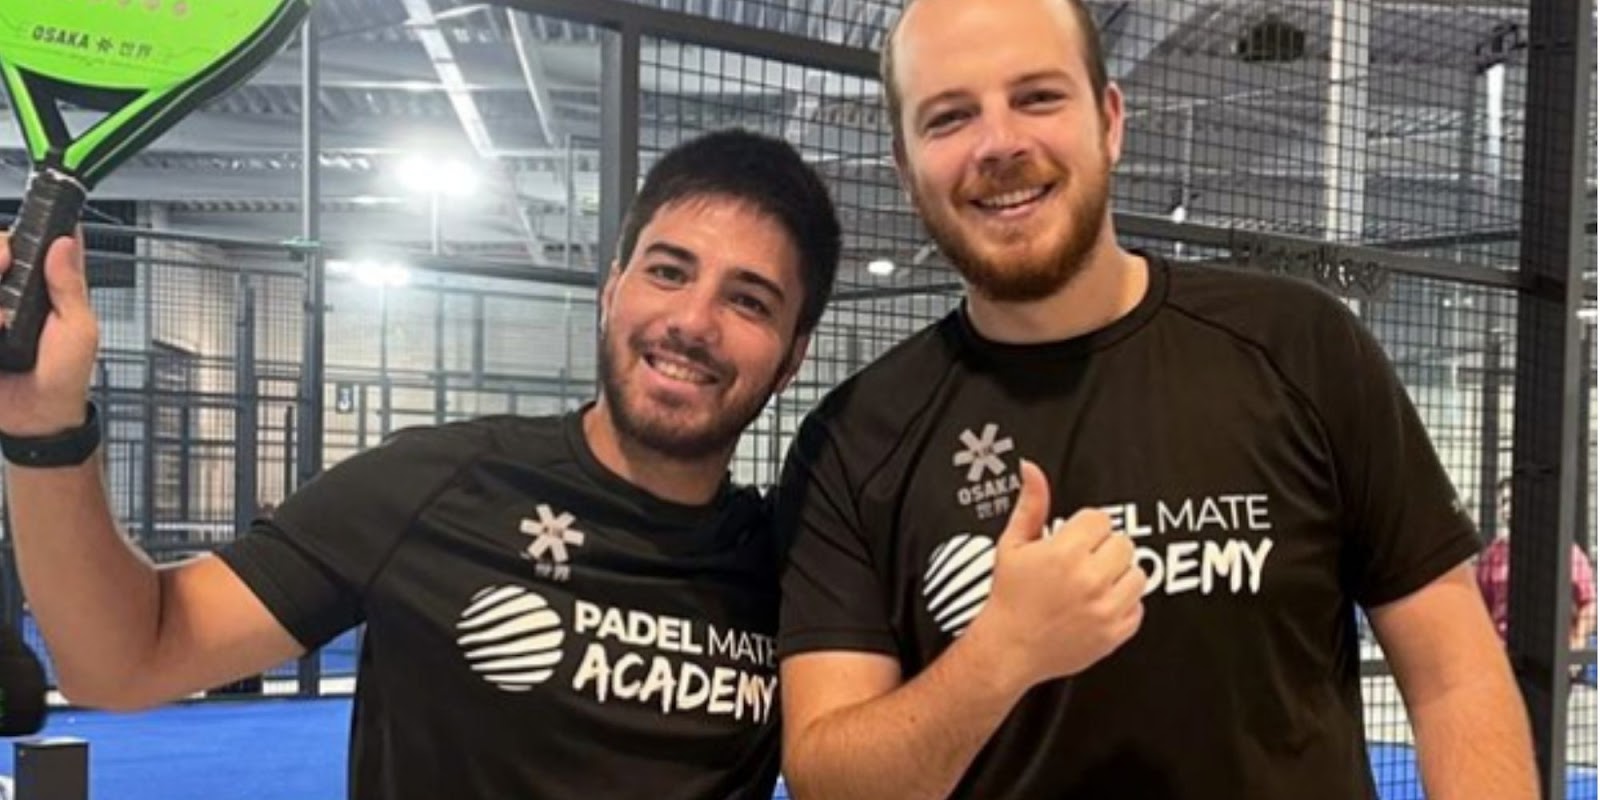 Padel Mate Academy trainers. 